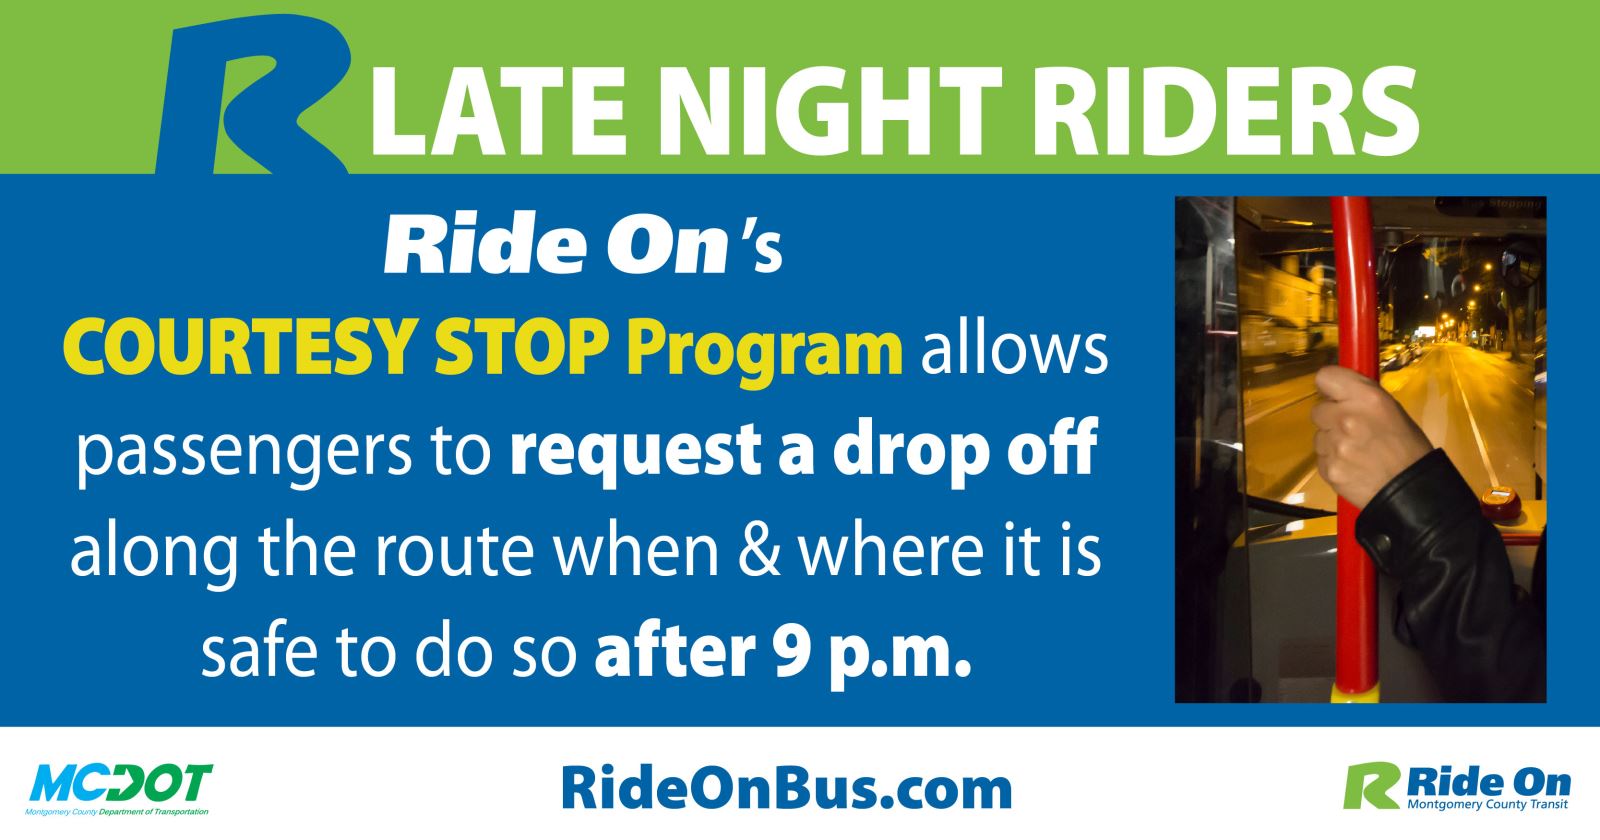 Late night riders: Ride On's courtesy stop program allows riders to request a drop off along the route when & where it is safe to do so after 9 p.m.